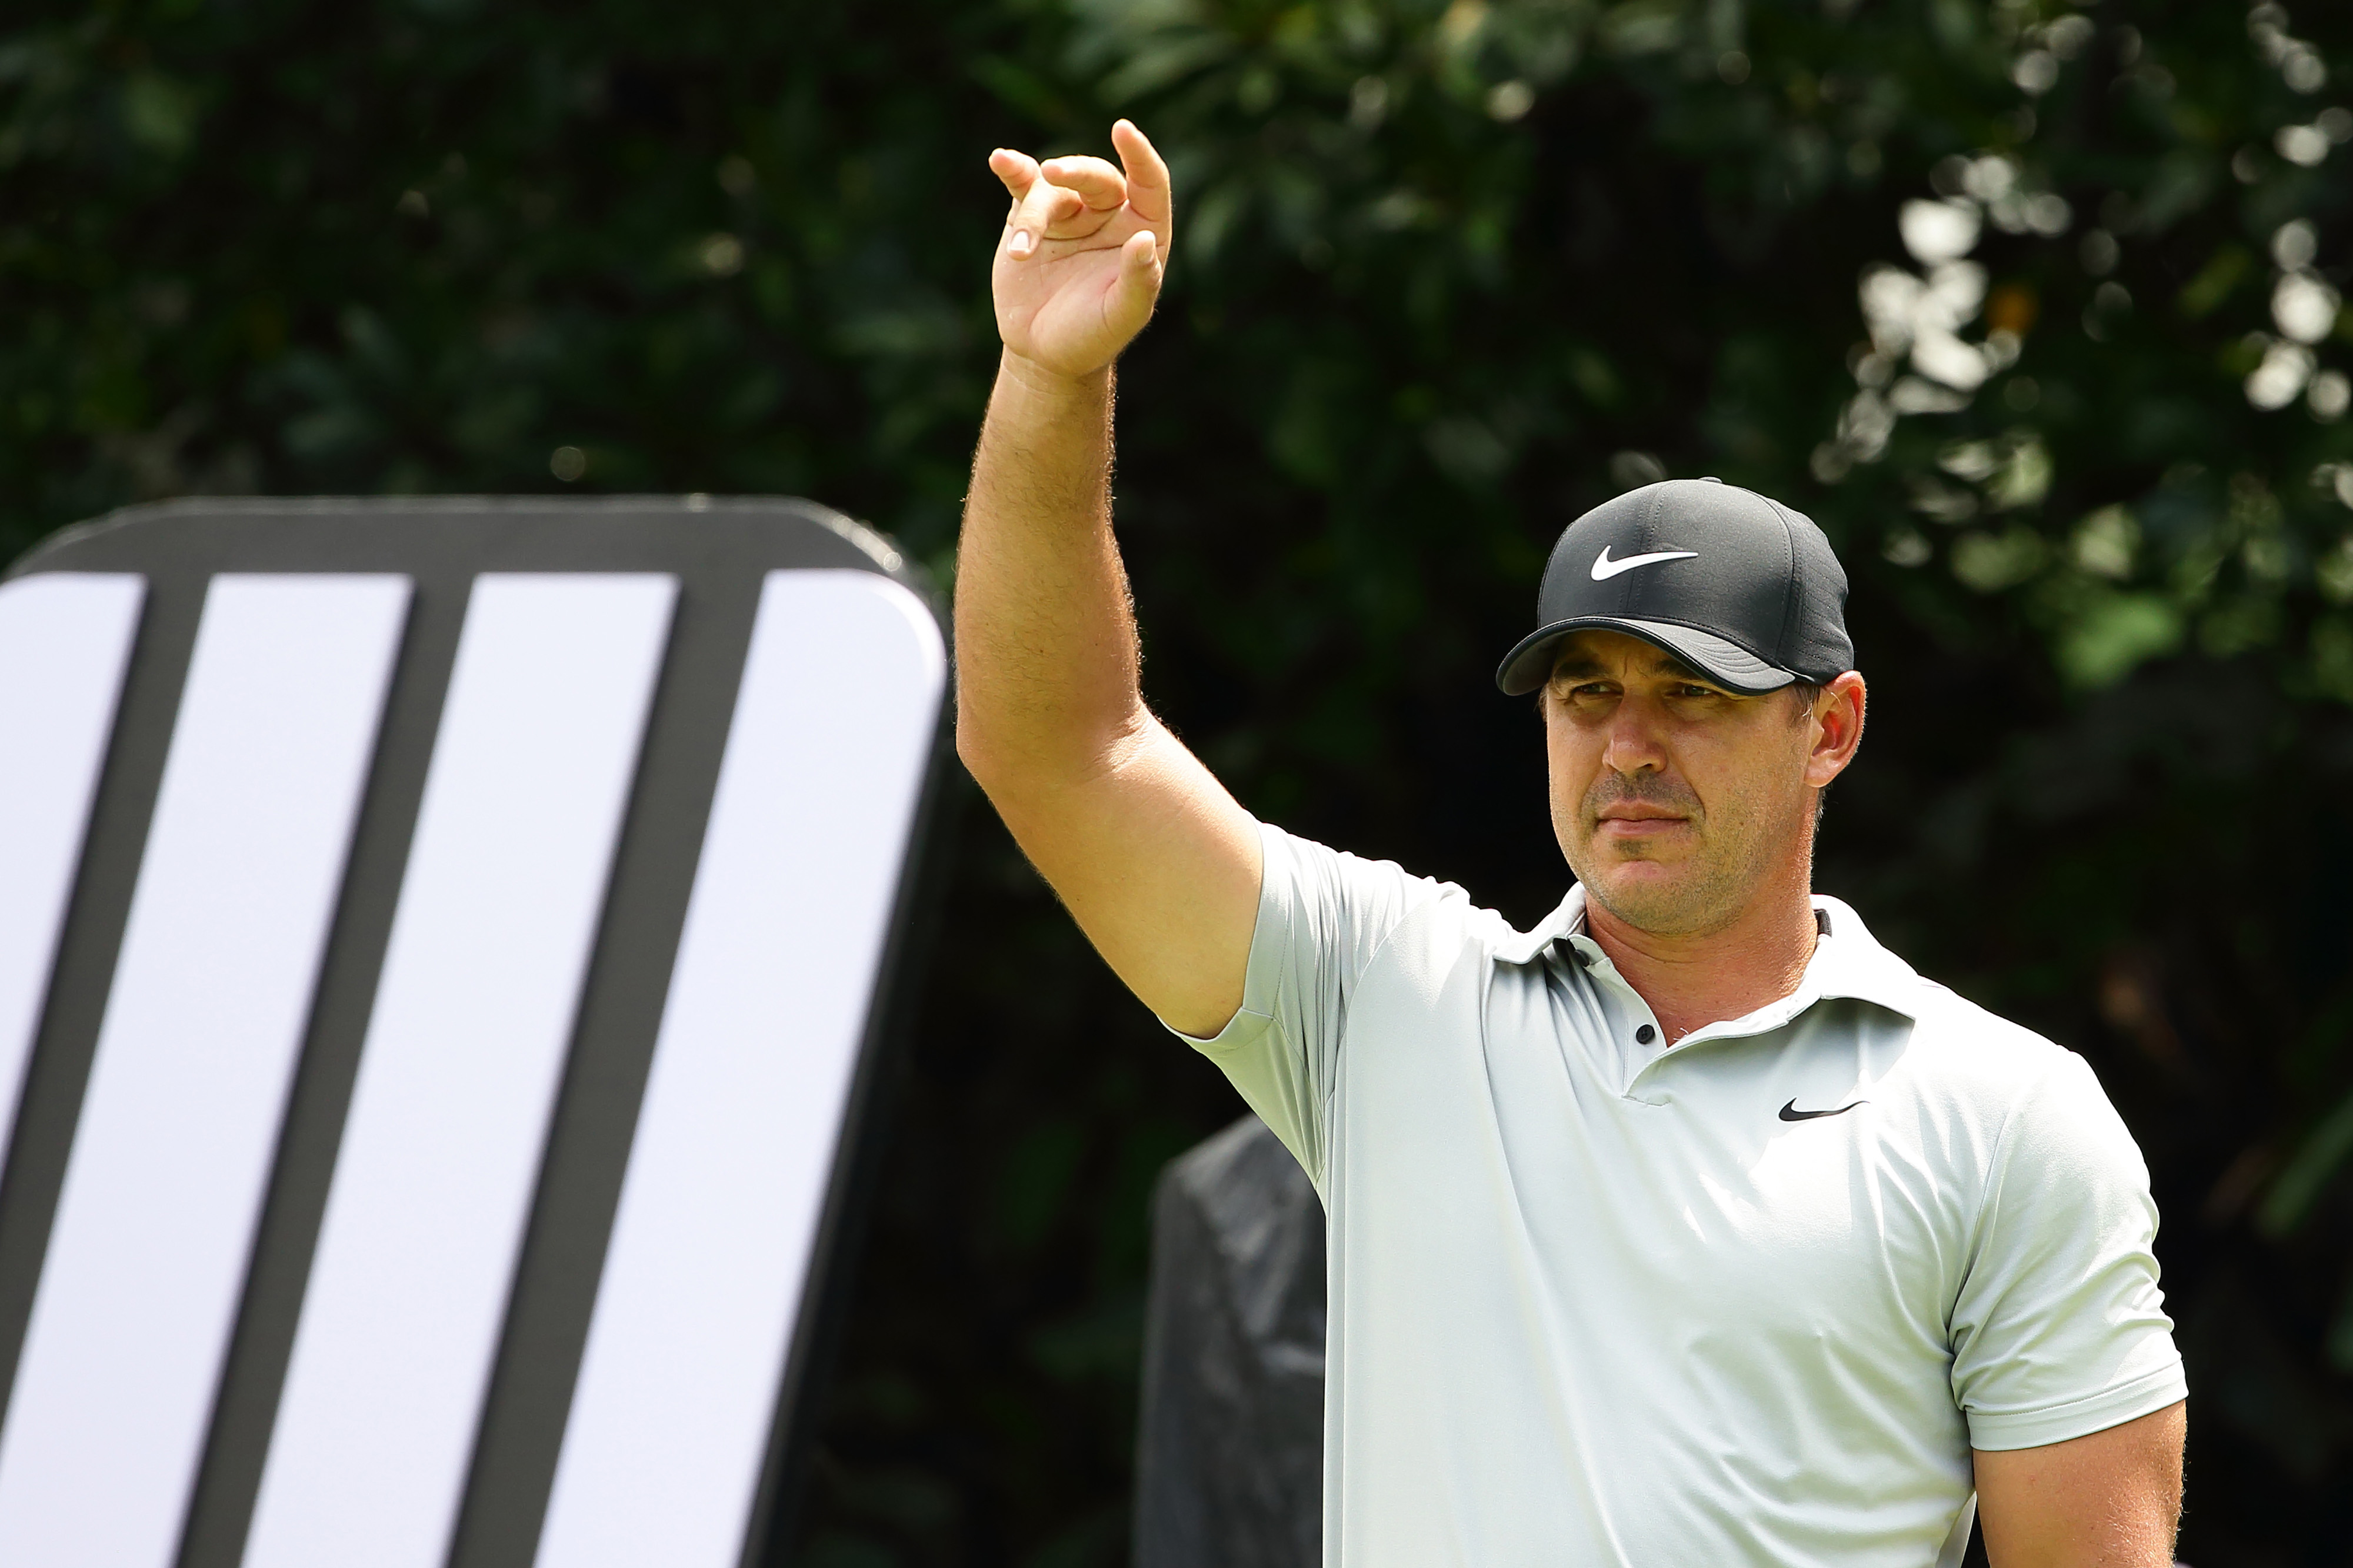 Brooks Koepka's coach says he expects LIV golfers to struggle at